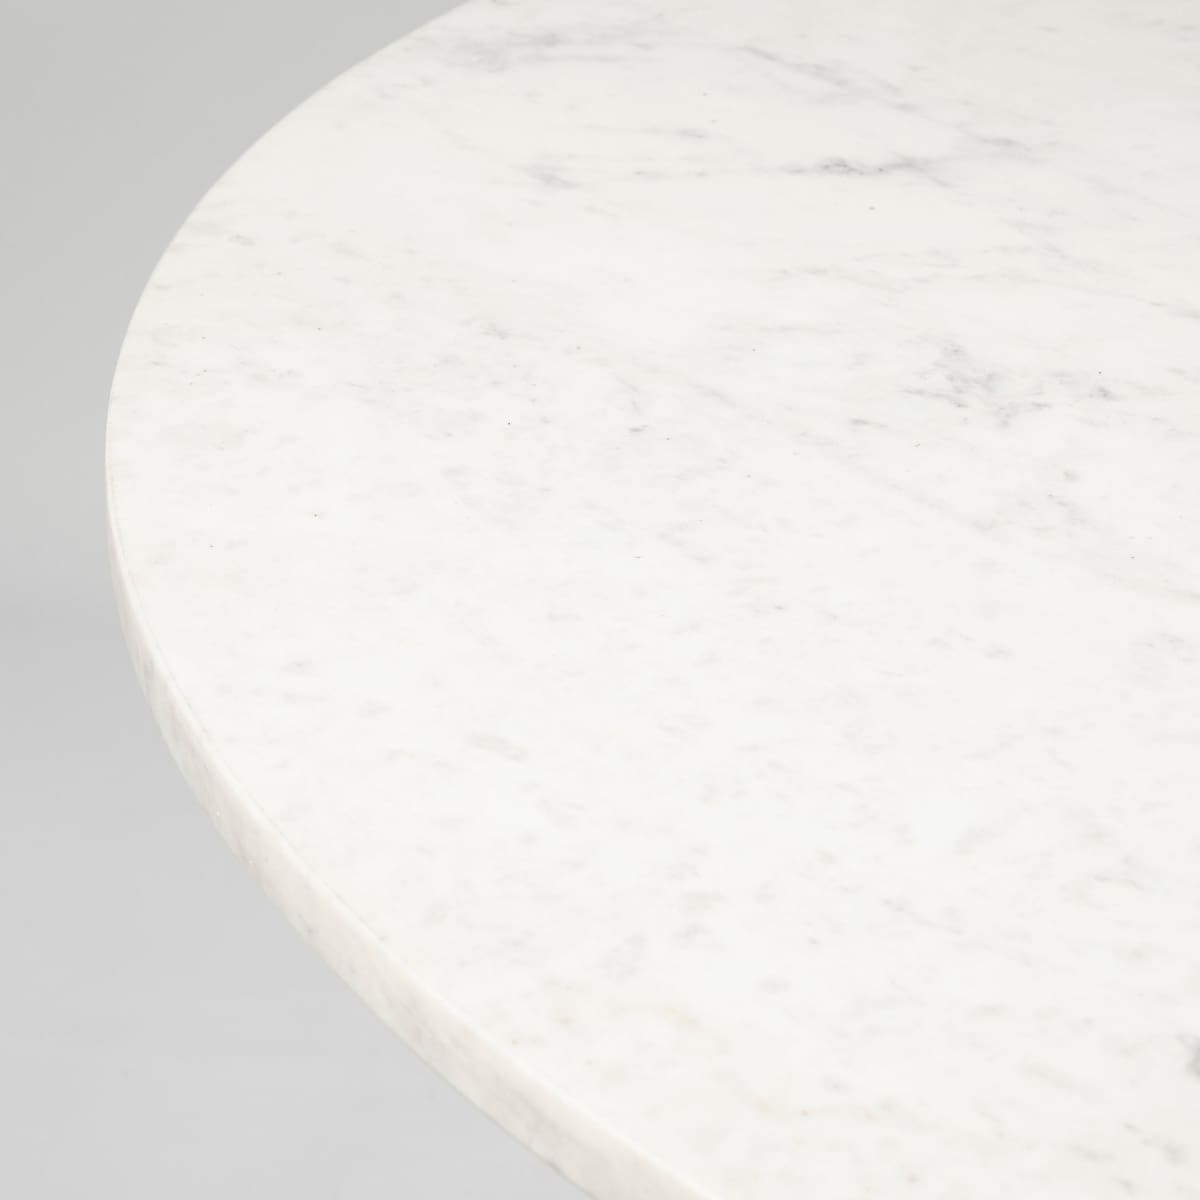 Tanner Dining Table White Marble | Black Metal | Round - dining-table